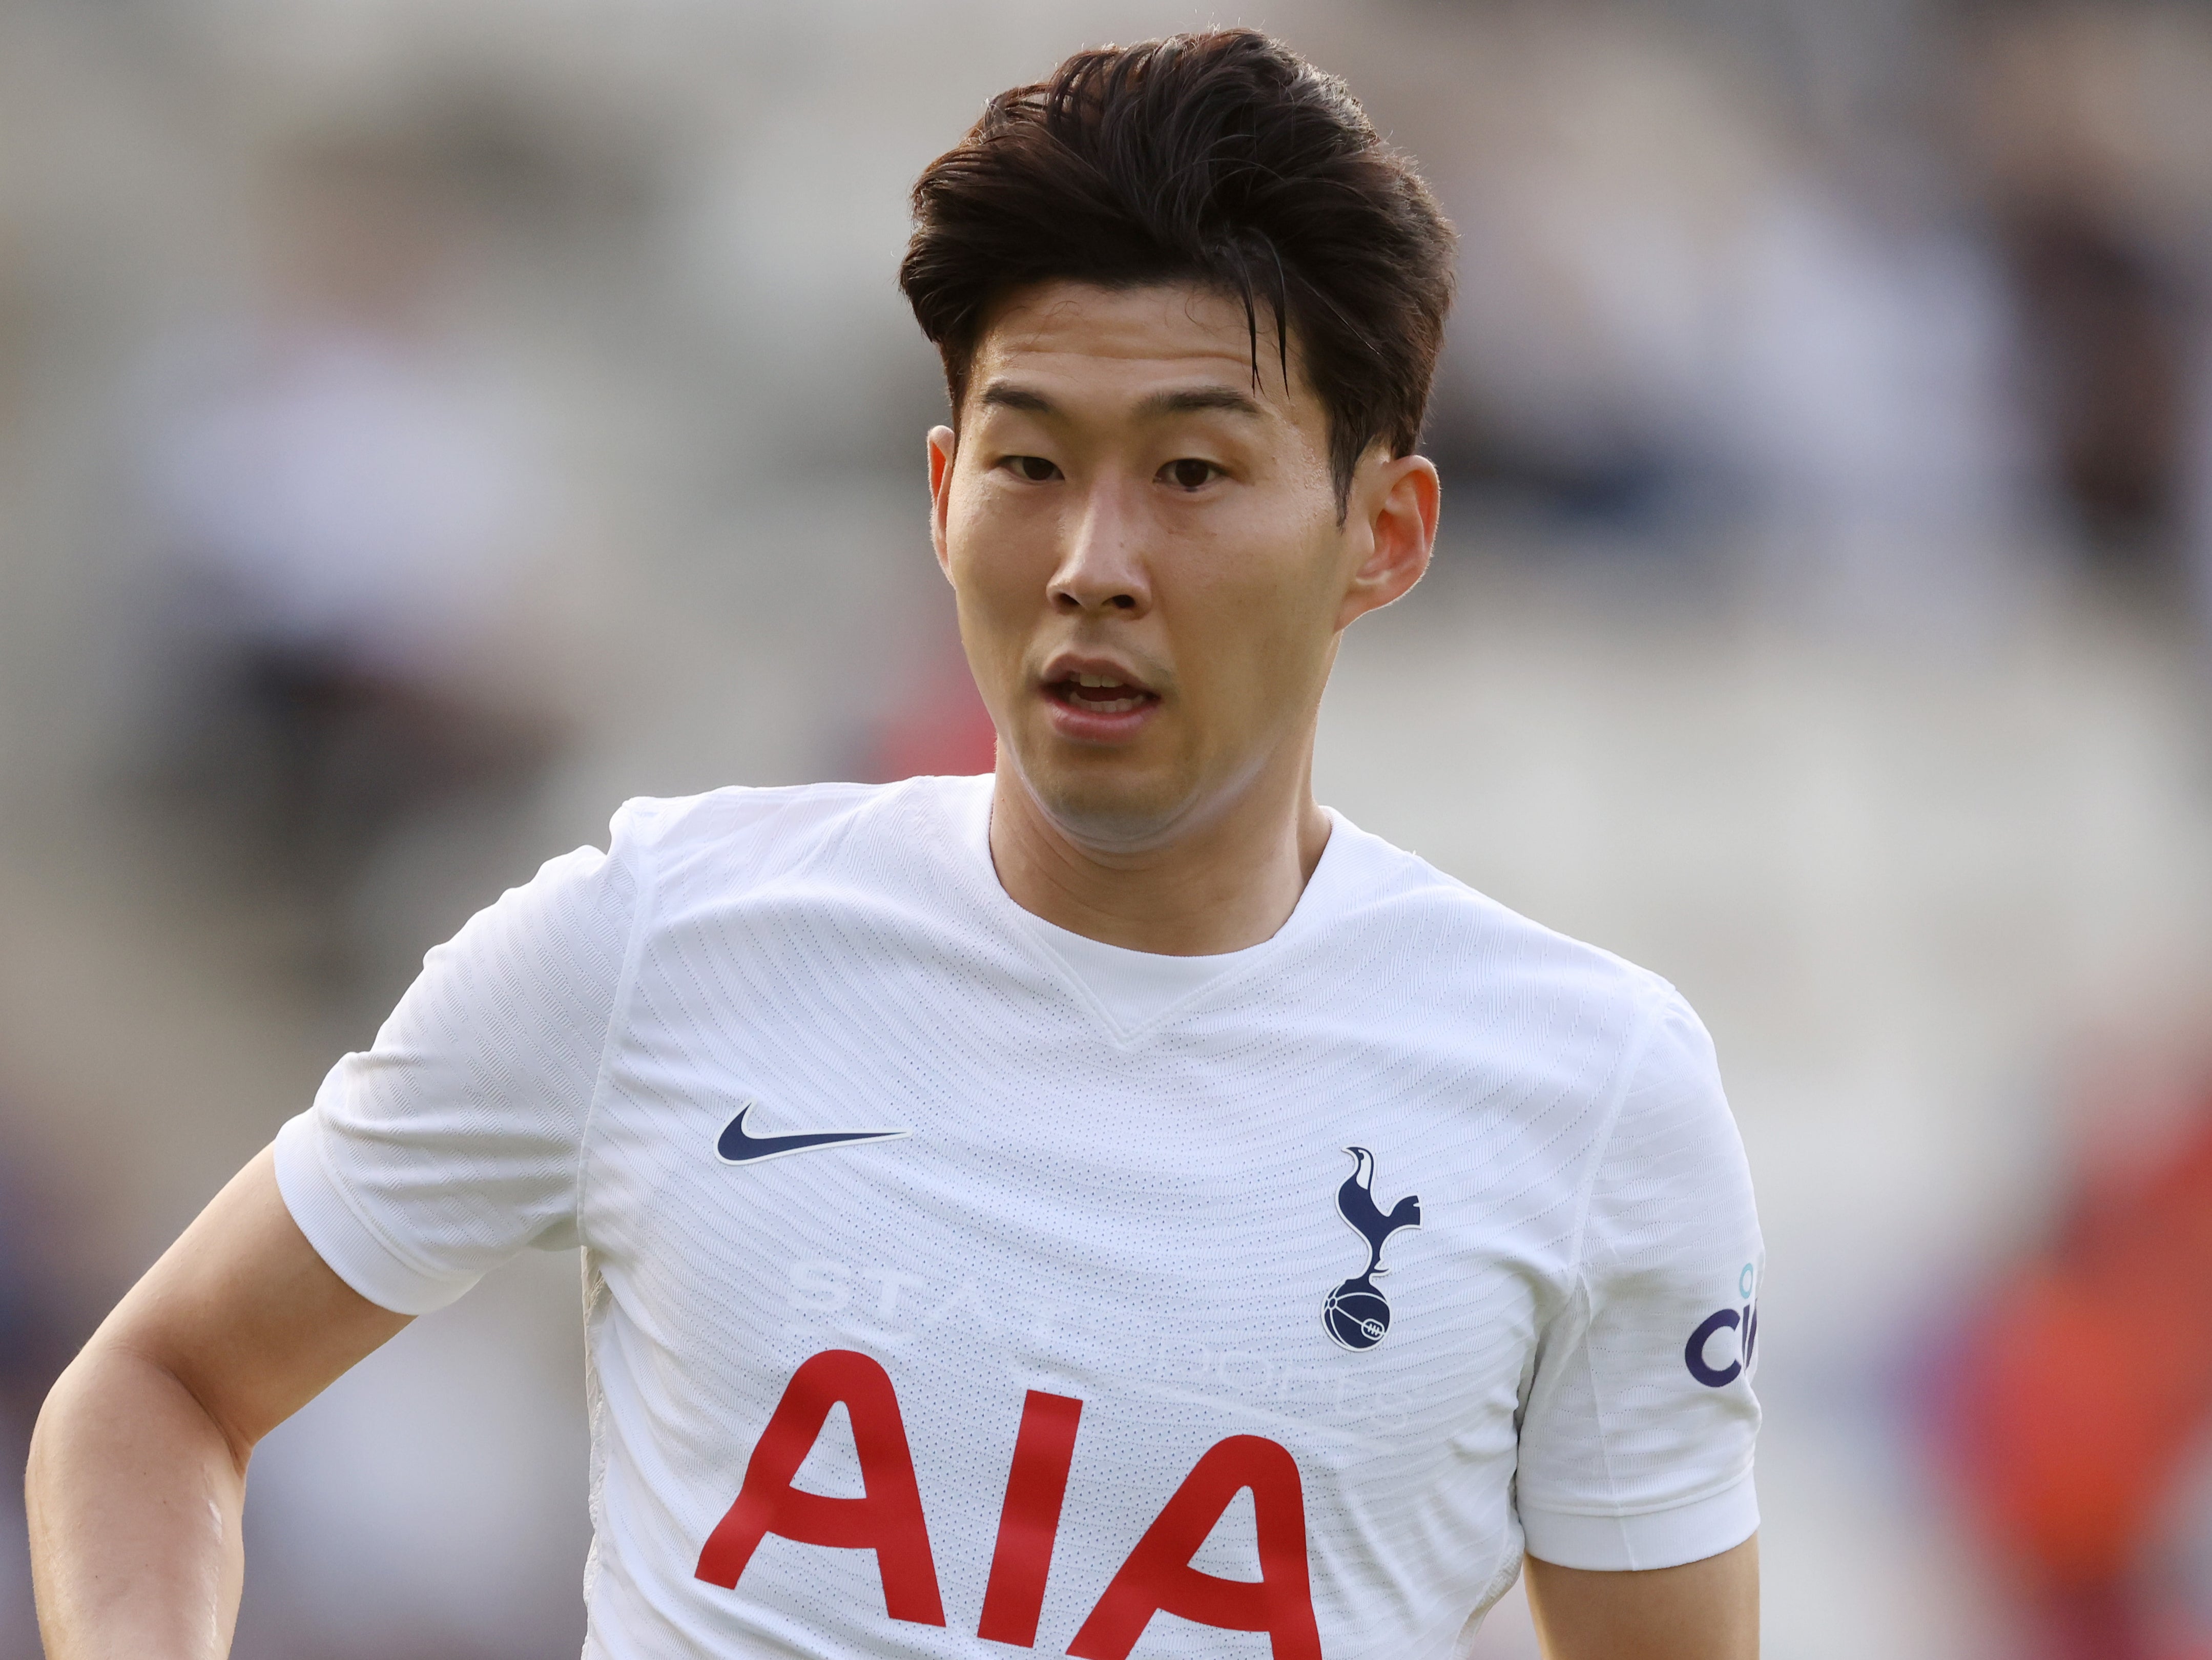 Son Heung-Min of Tottenham Hotspur in action against Colchester United